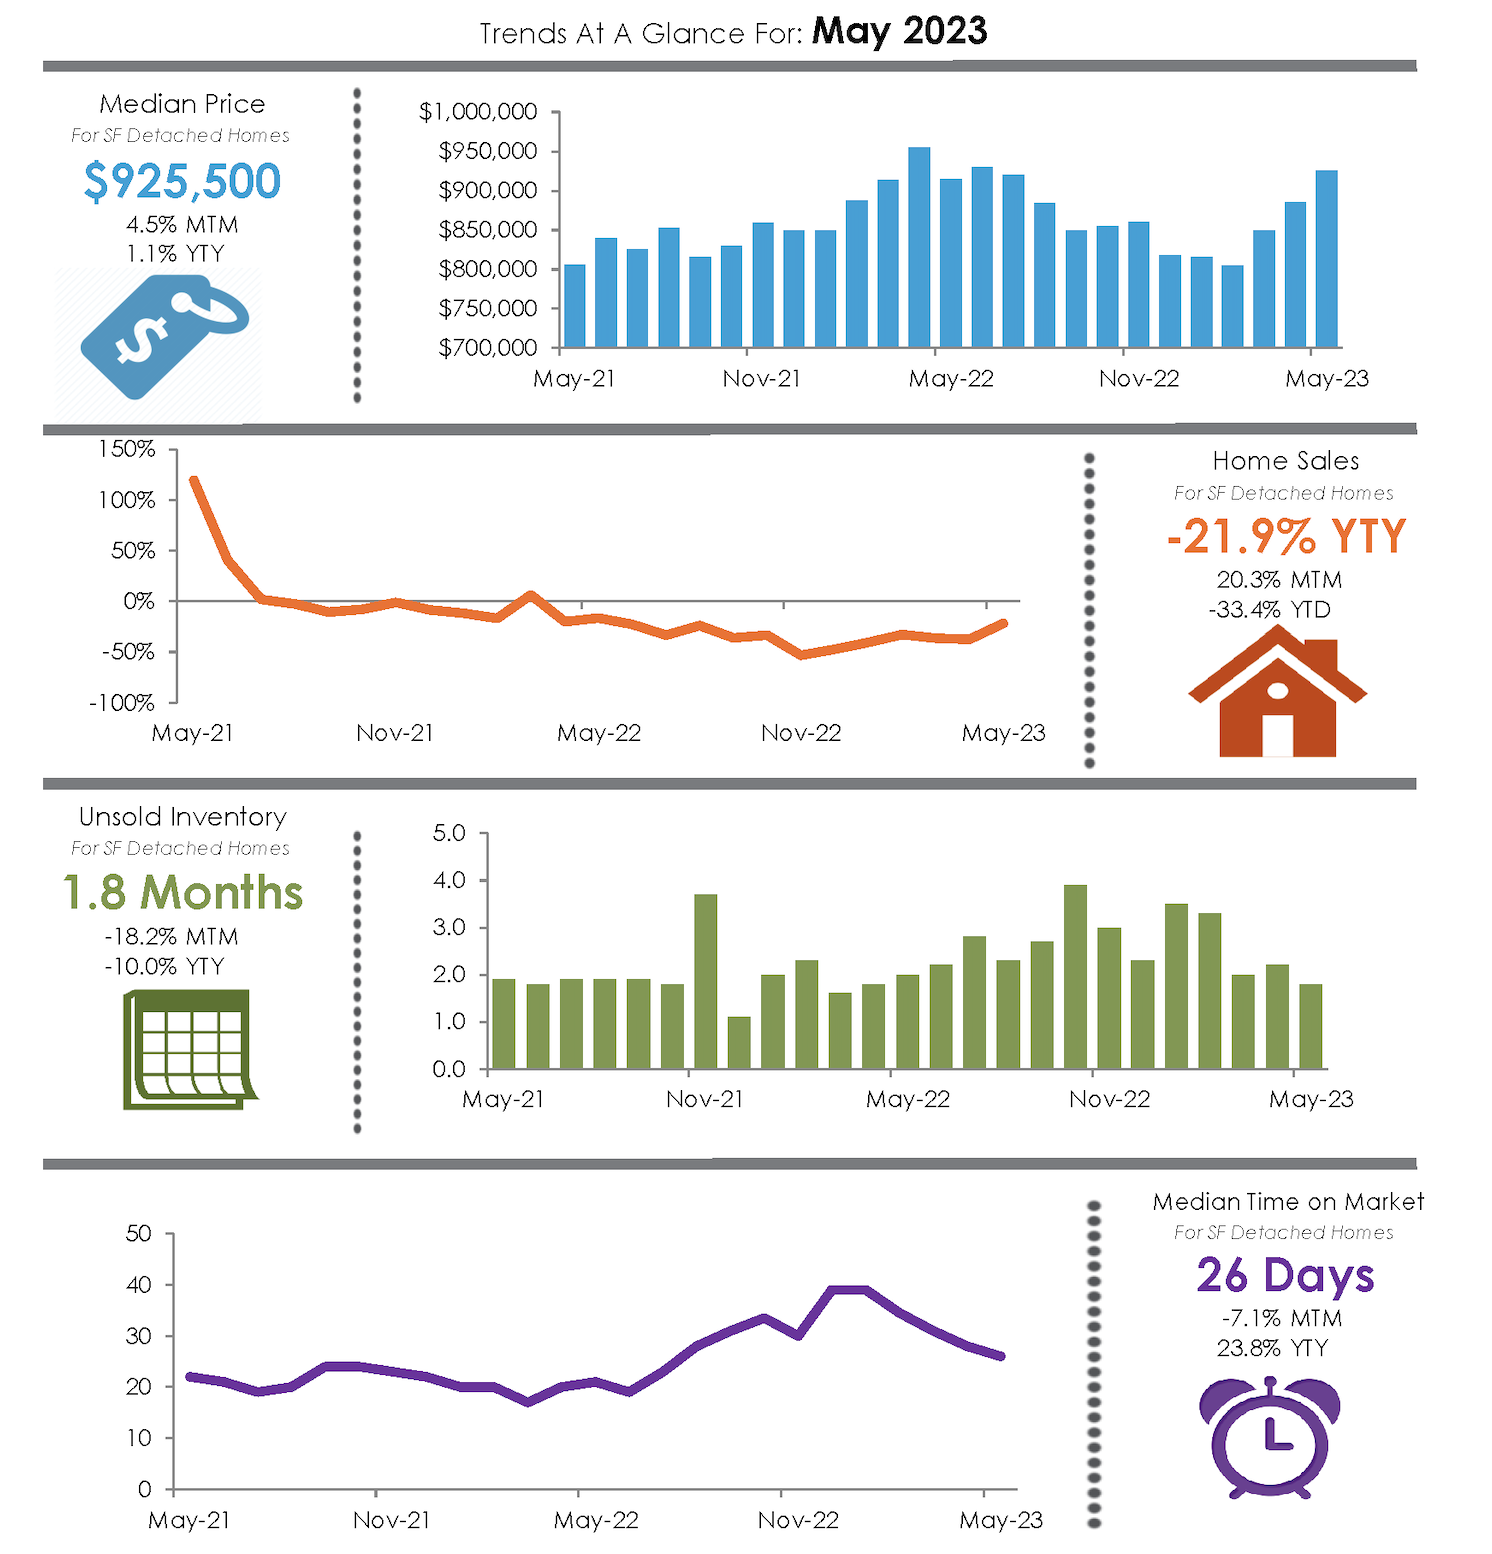 Housing Market Trends At a Glance